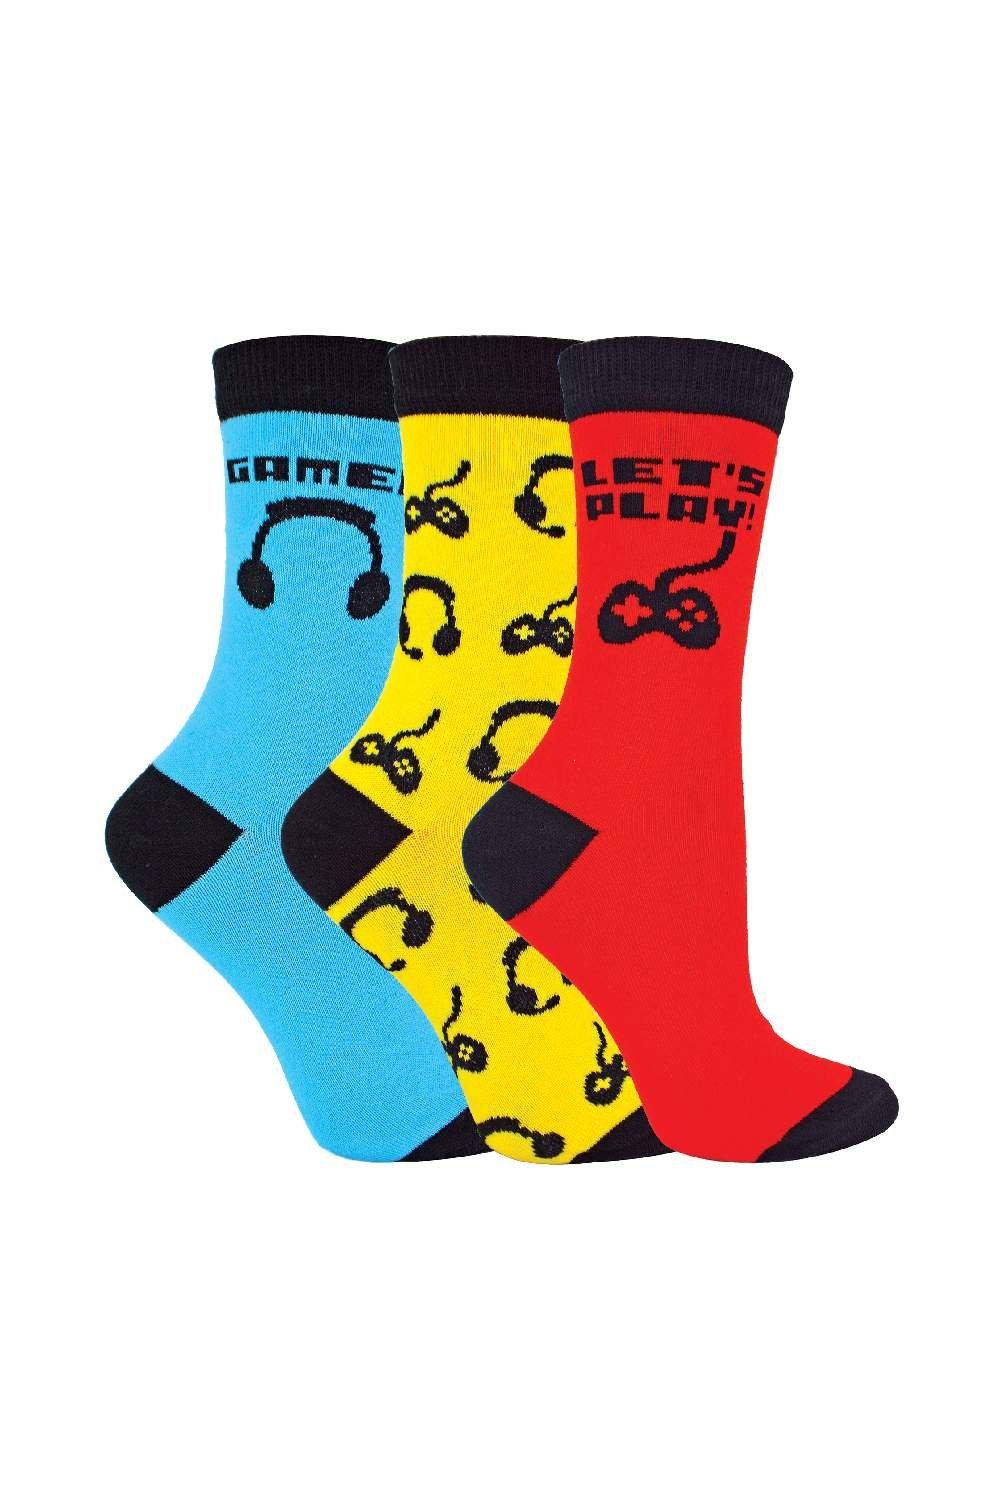 3 Pairs Funky Gaming Design Novelty Cotton Rich Socks